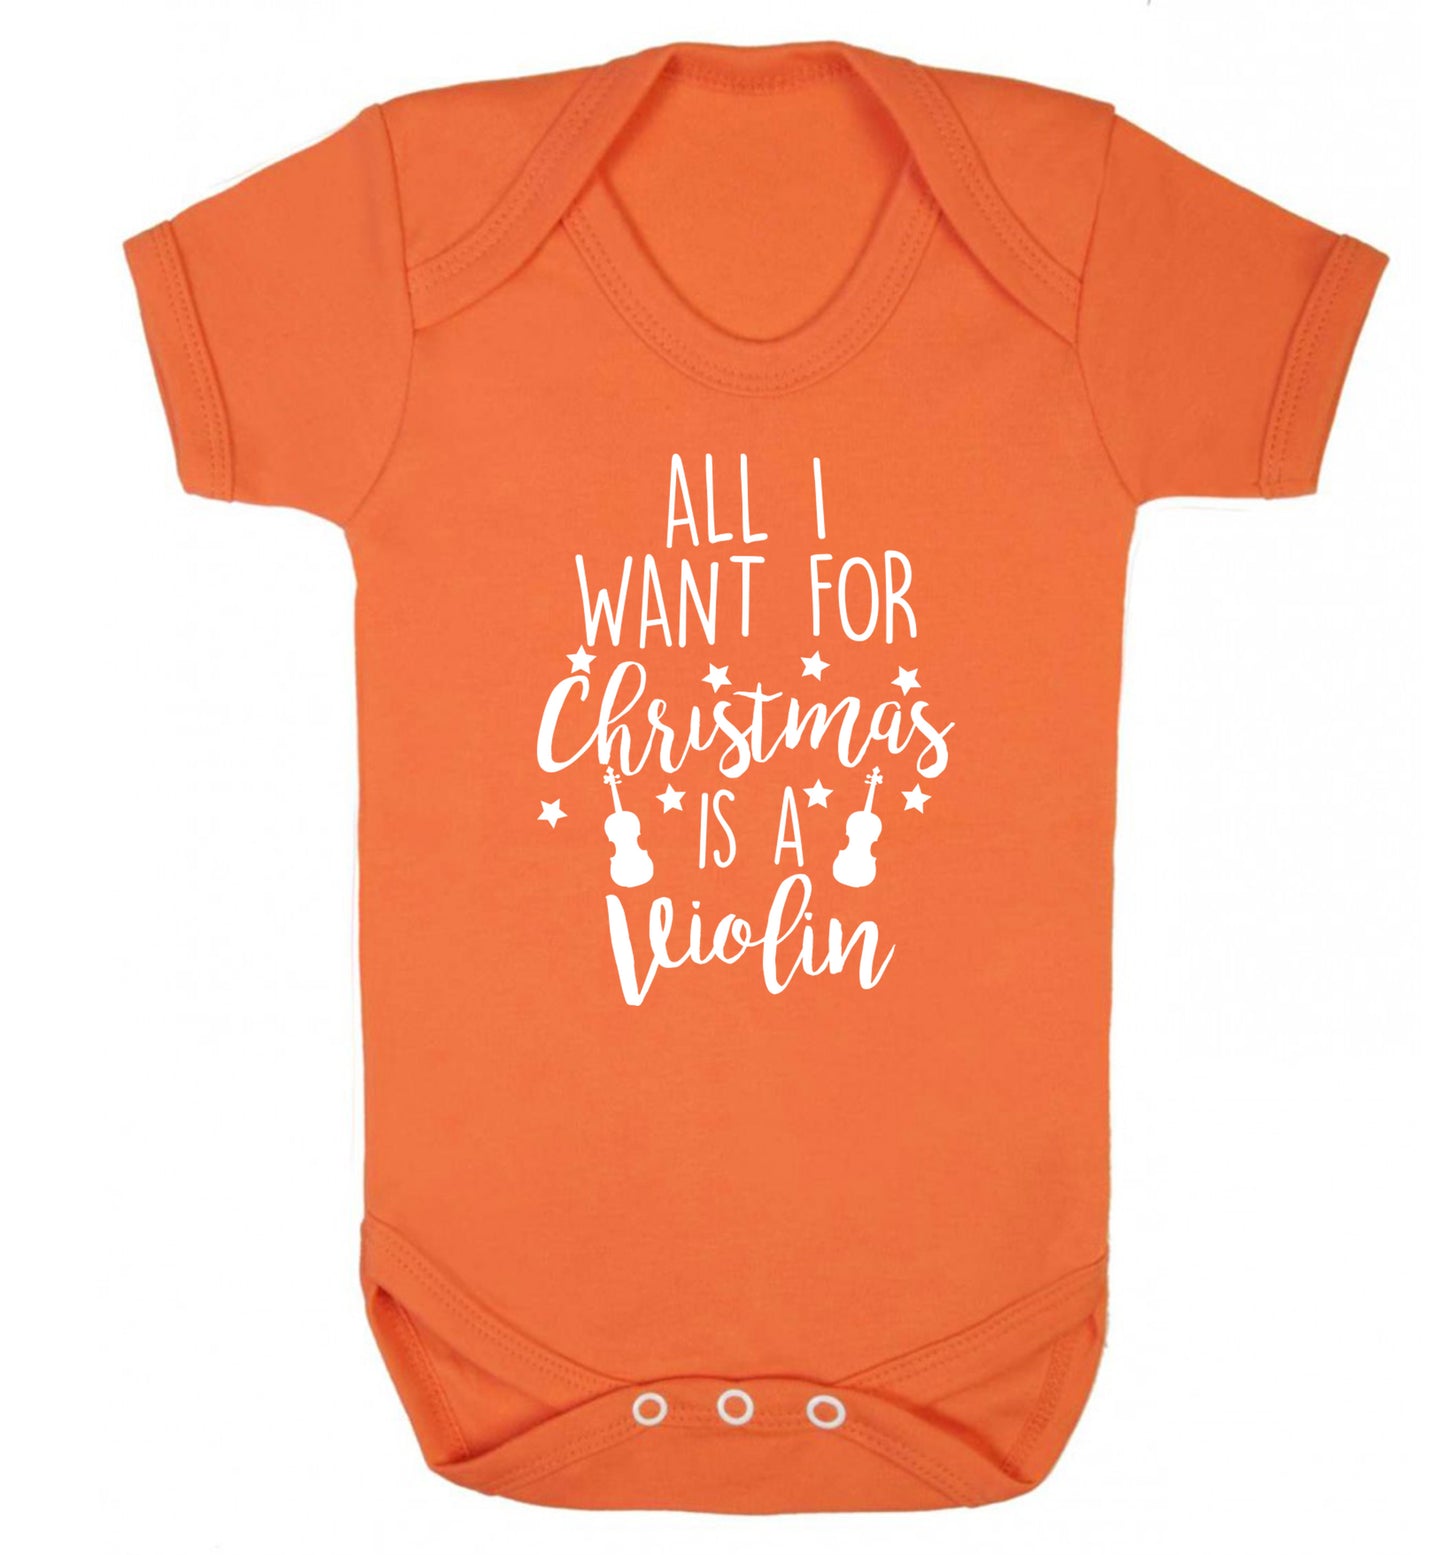 All I Want For Christmas is a Violin Baby Vest orange 18-24 months